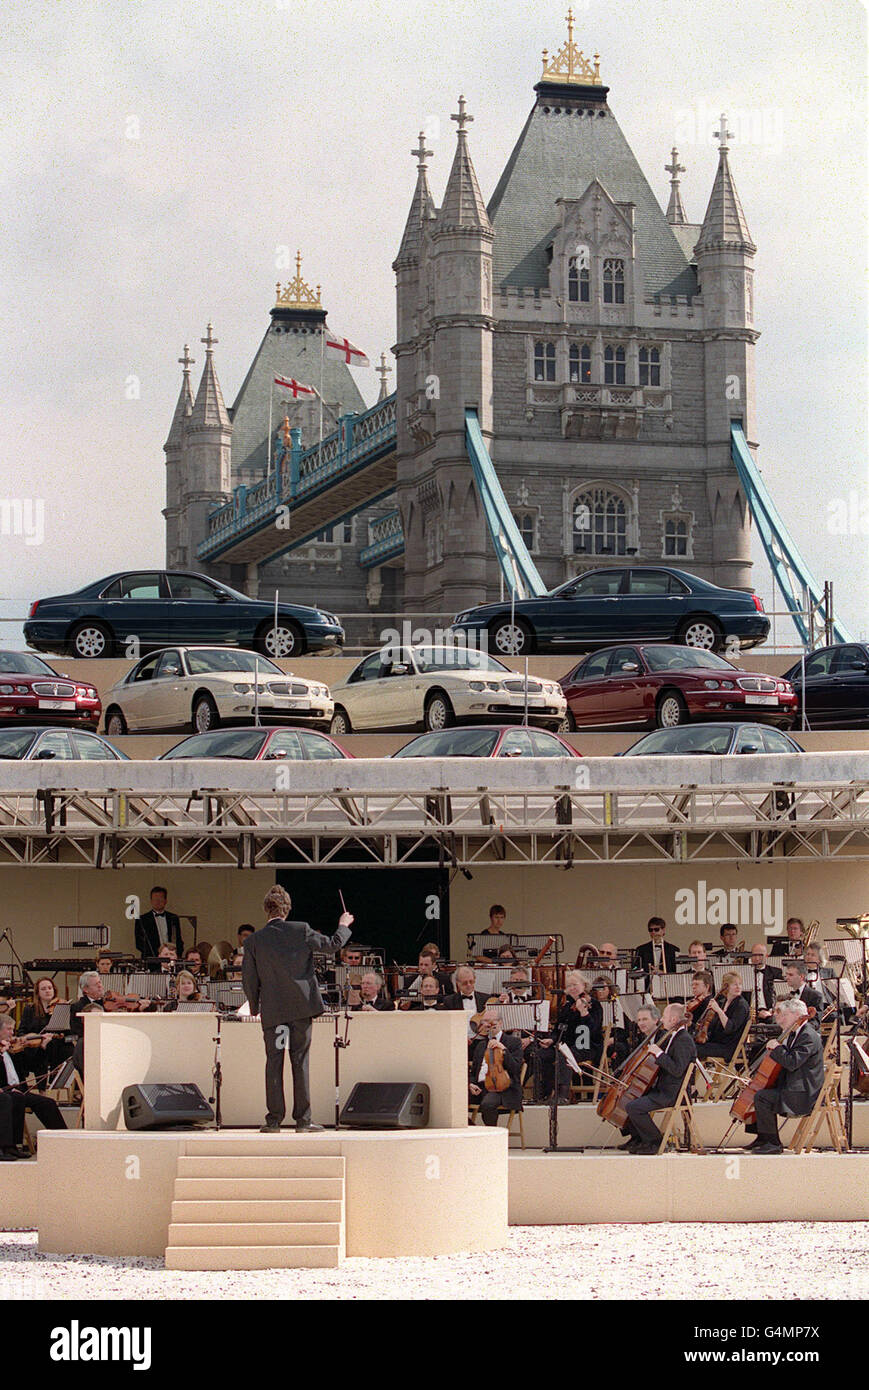 London's Tower Bridge makes an impressive backdrop for the launch of the Rover 75. The Royal Philharmonic Concert Orchestra also played a 10-minute piece written and composed by Eurythmics rock star Dave Stewart to mark the launch of the new vehicle. * which is the result of a four-year, 700 million investment programme that BMW-owned Rover hopes will halt its recent sales slump. Stock Photo